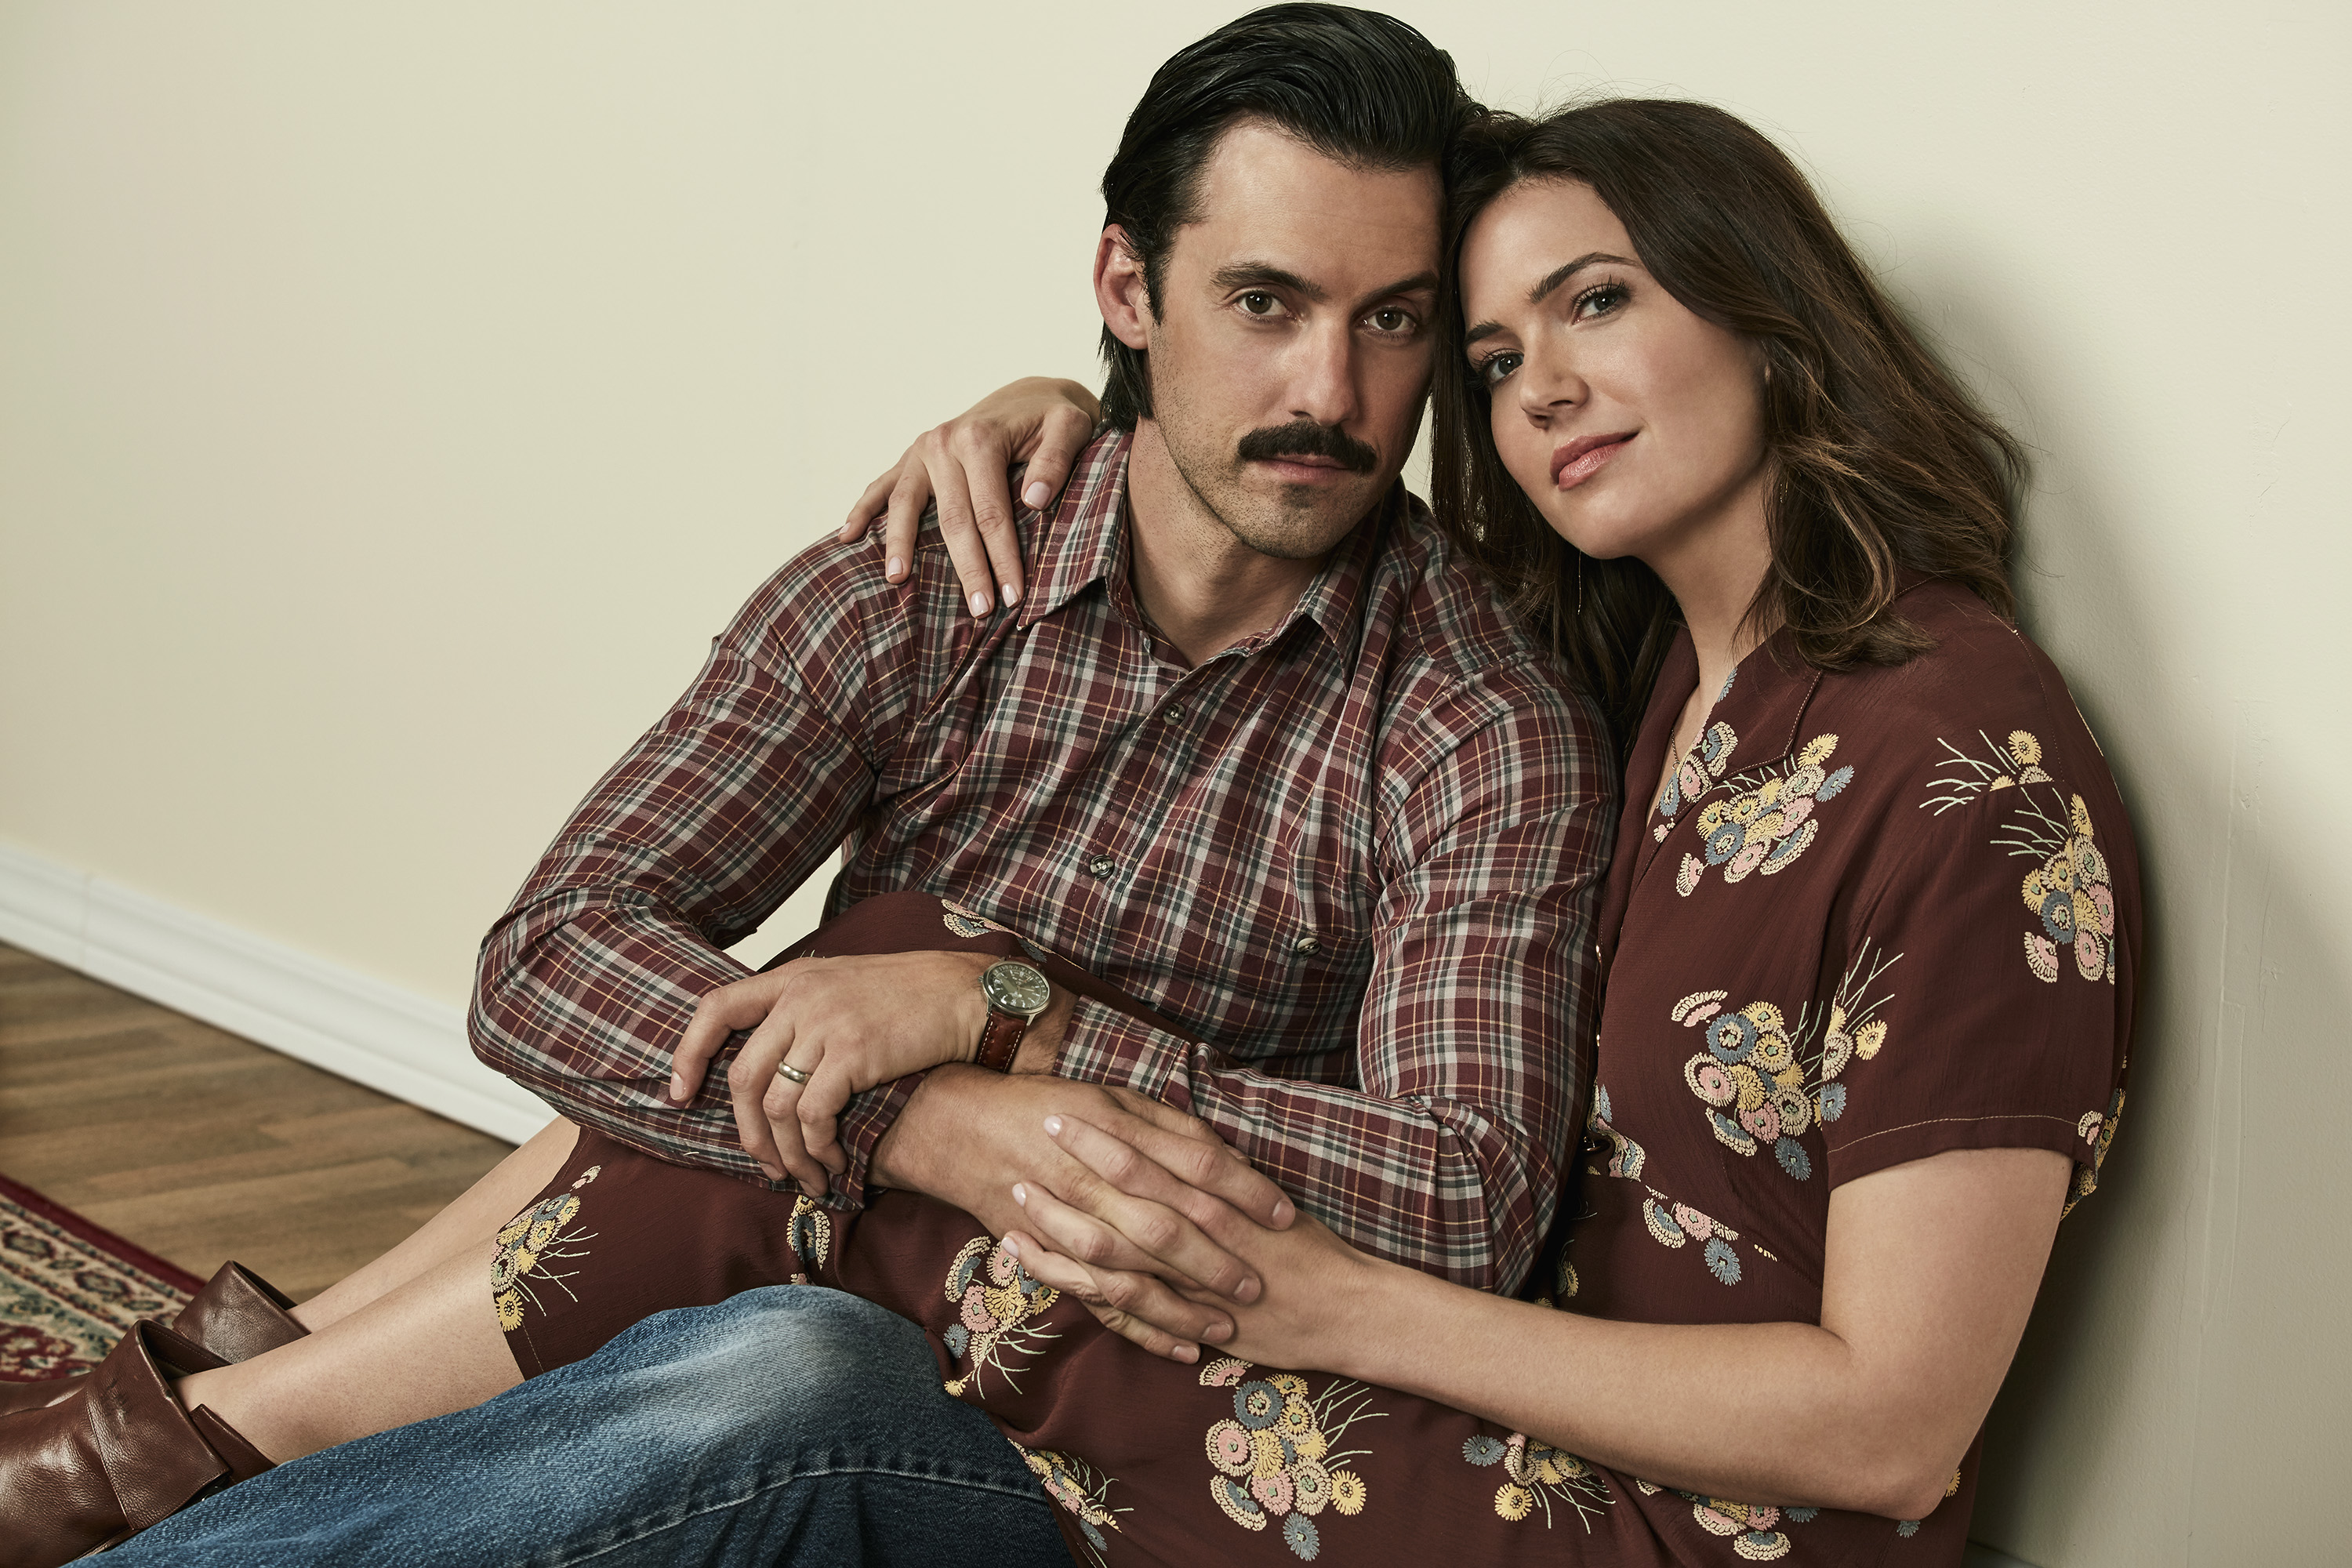 This Is Us Season 6 actors Milo Ventimiglia and Mandy Moore pose while sitting on the floor next to each other.